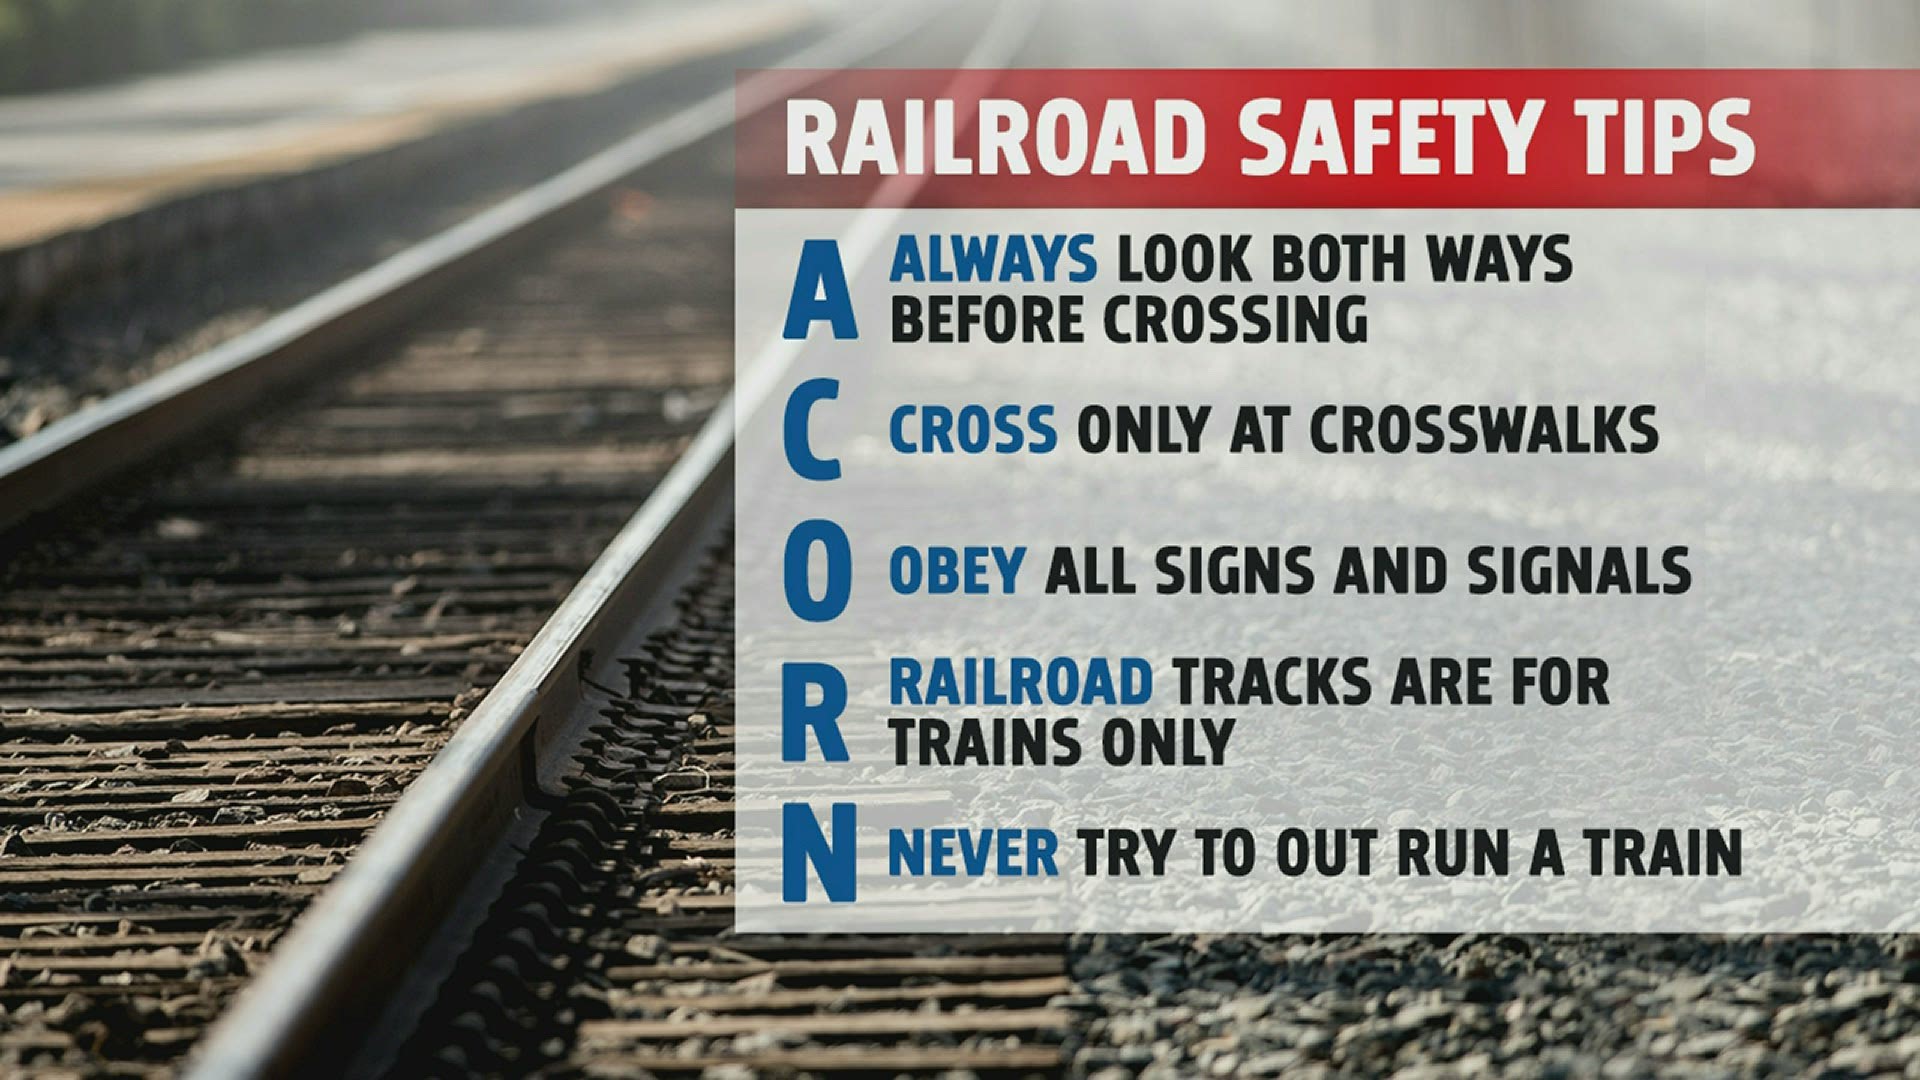 If you're going to go anywhere need train tracks, you should be aware of all the dangers and hazards that come with the territory.